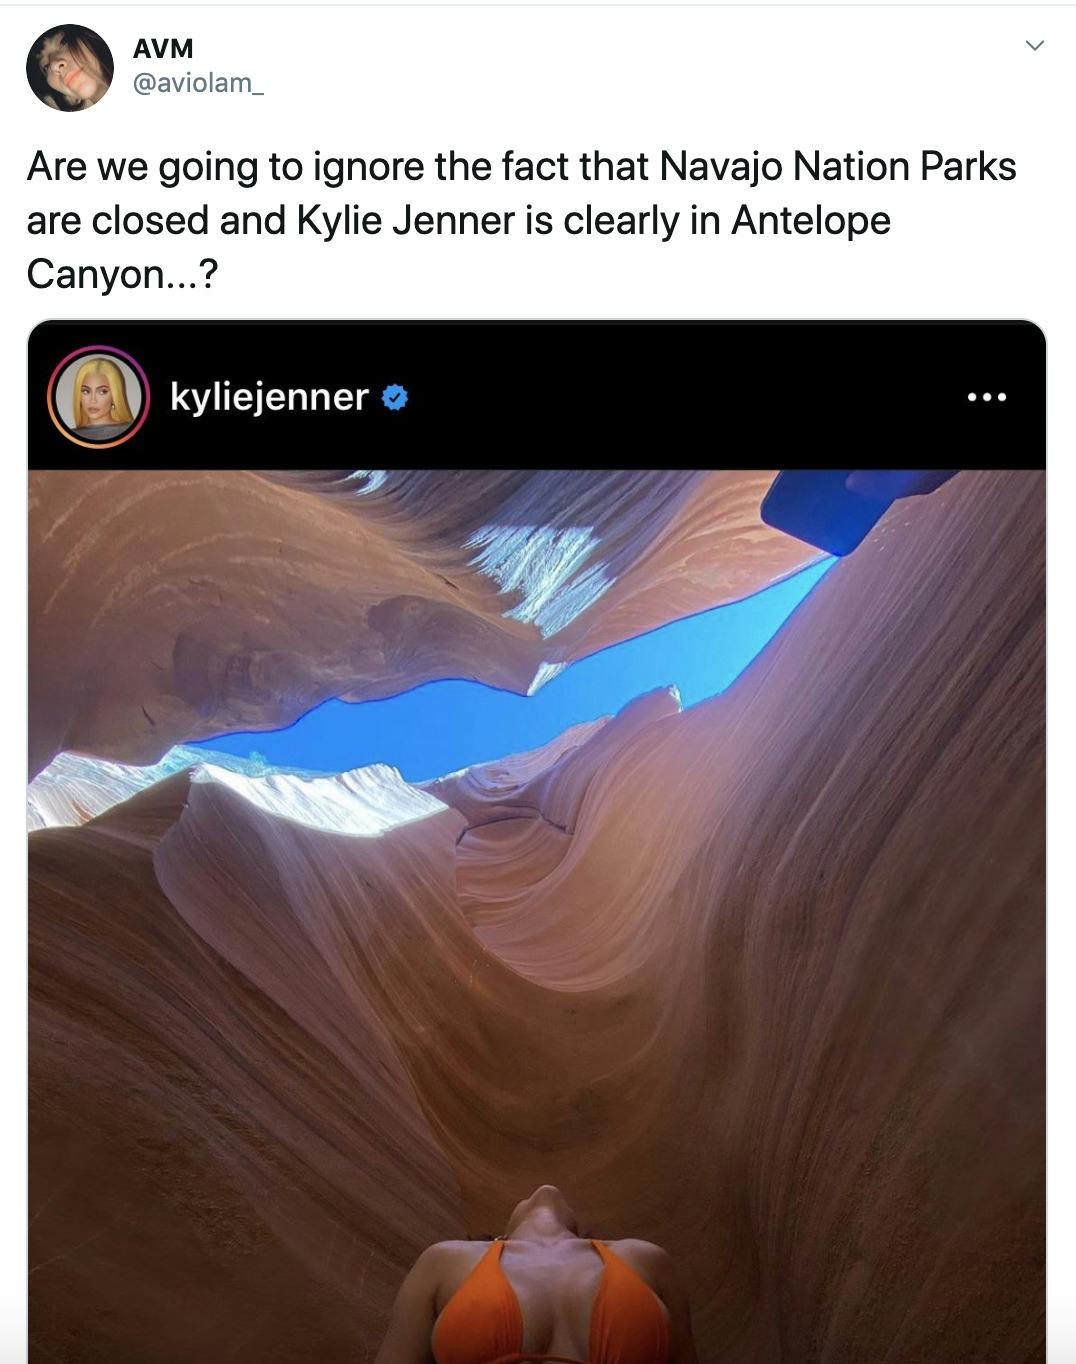 'Are we going to ignore the fact that Navajo Nation Parks are closed and Kylie Jenner is clearly in Antelope Canyon...?' copy of the photograph